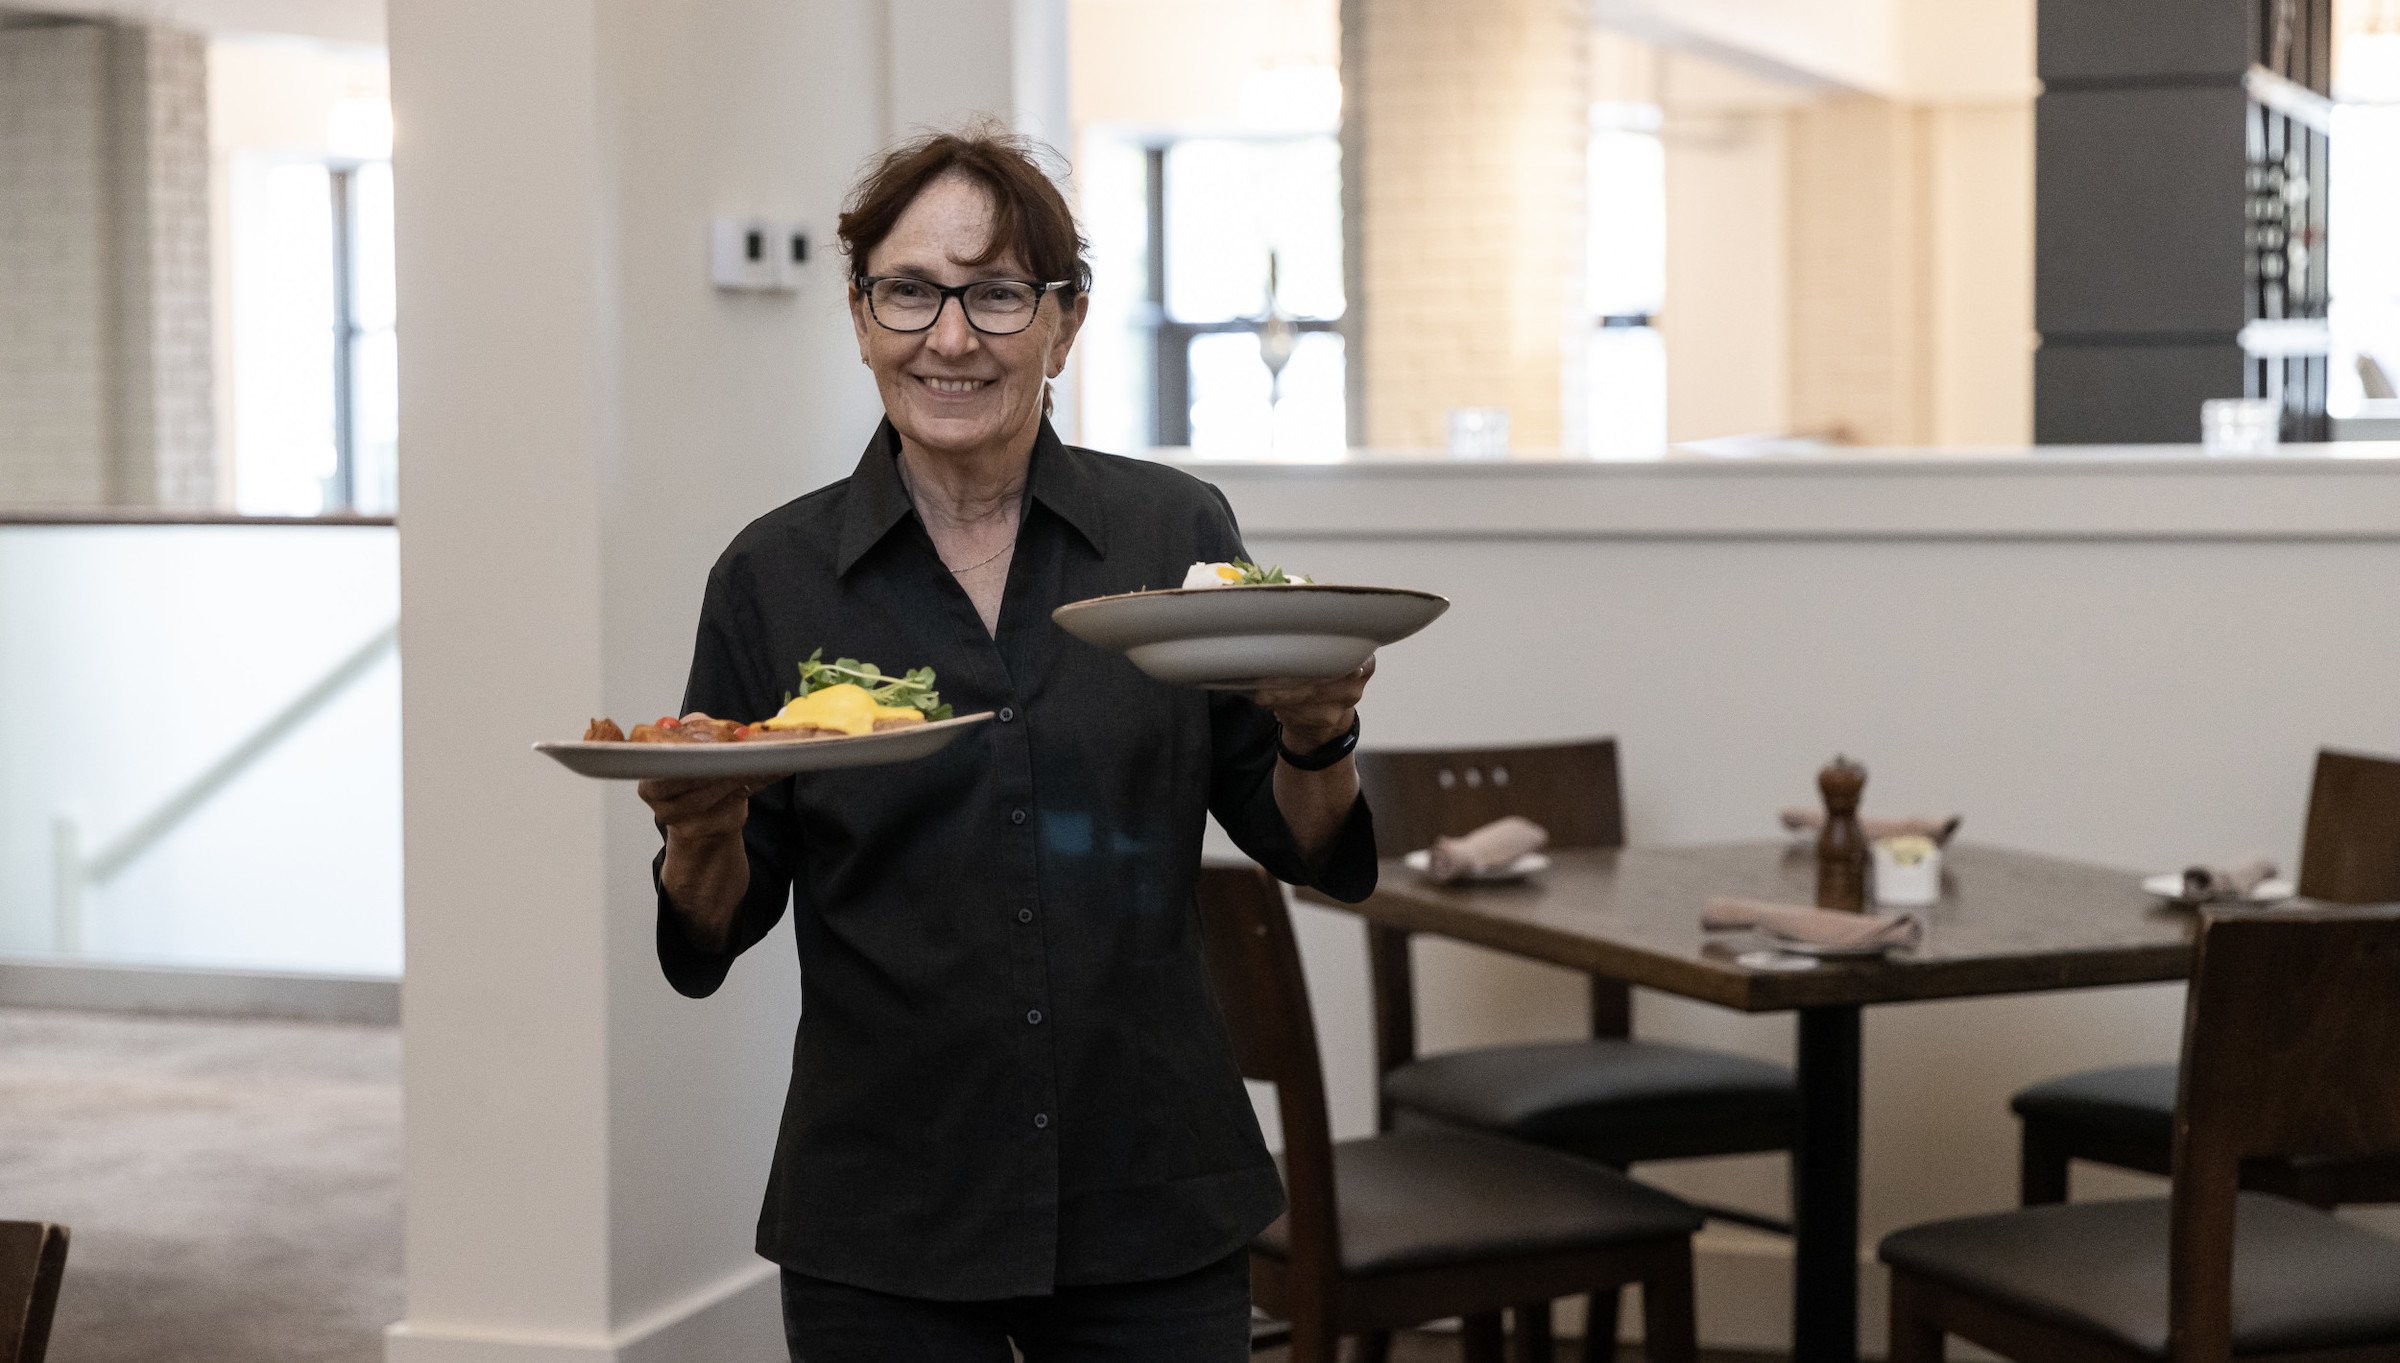 Server at Blue Mountain Pottery Restaurant serving plates of breakfast